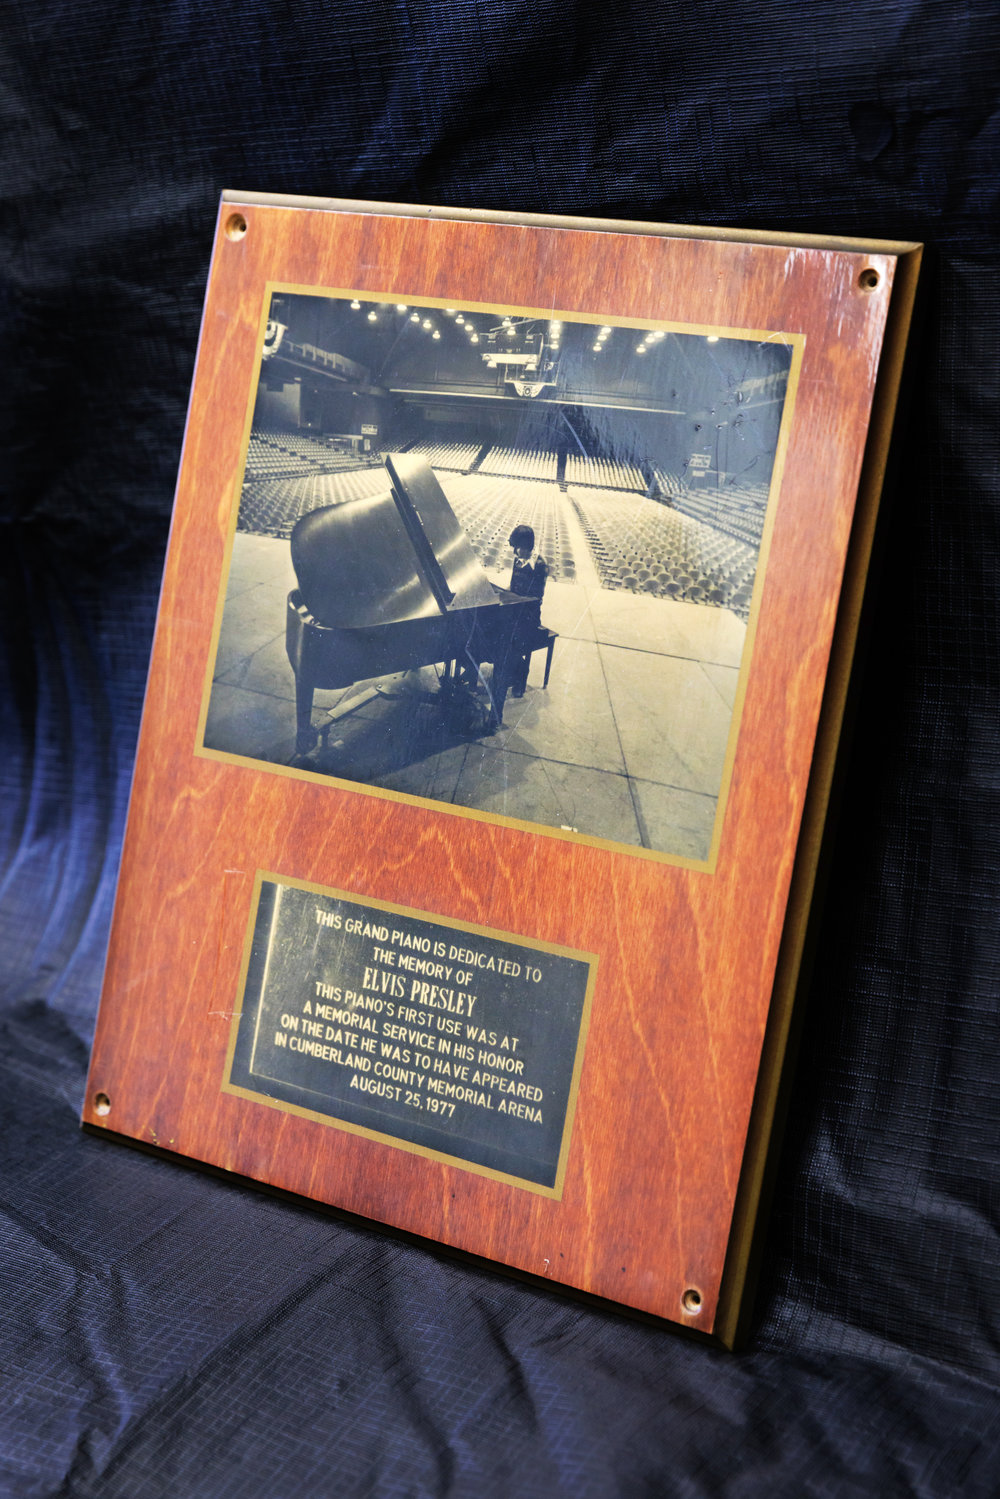 Milton Smith is pictured on a plaque playing a grand piano that was dedicated in memory of Elvis Presley at the Cumberland County Memorial Arena. Smith played at a memorial service at the arena on Aug. 25, 1977, the day Elvis was supposed to appear in concert there.